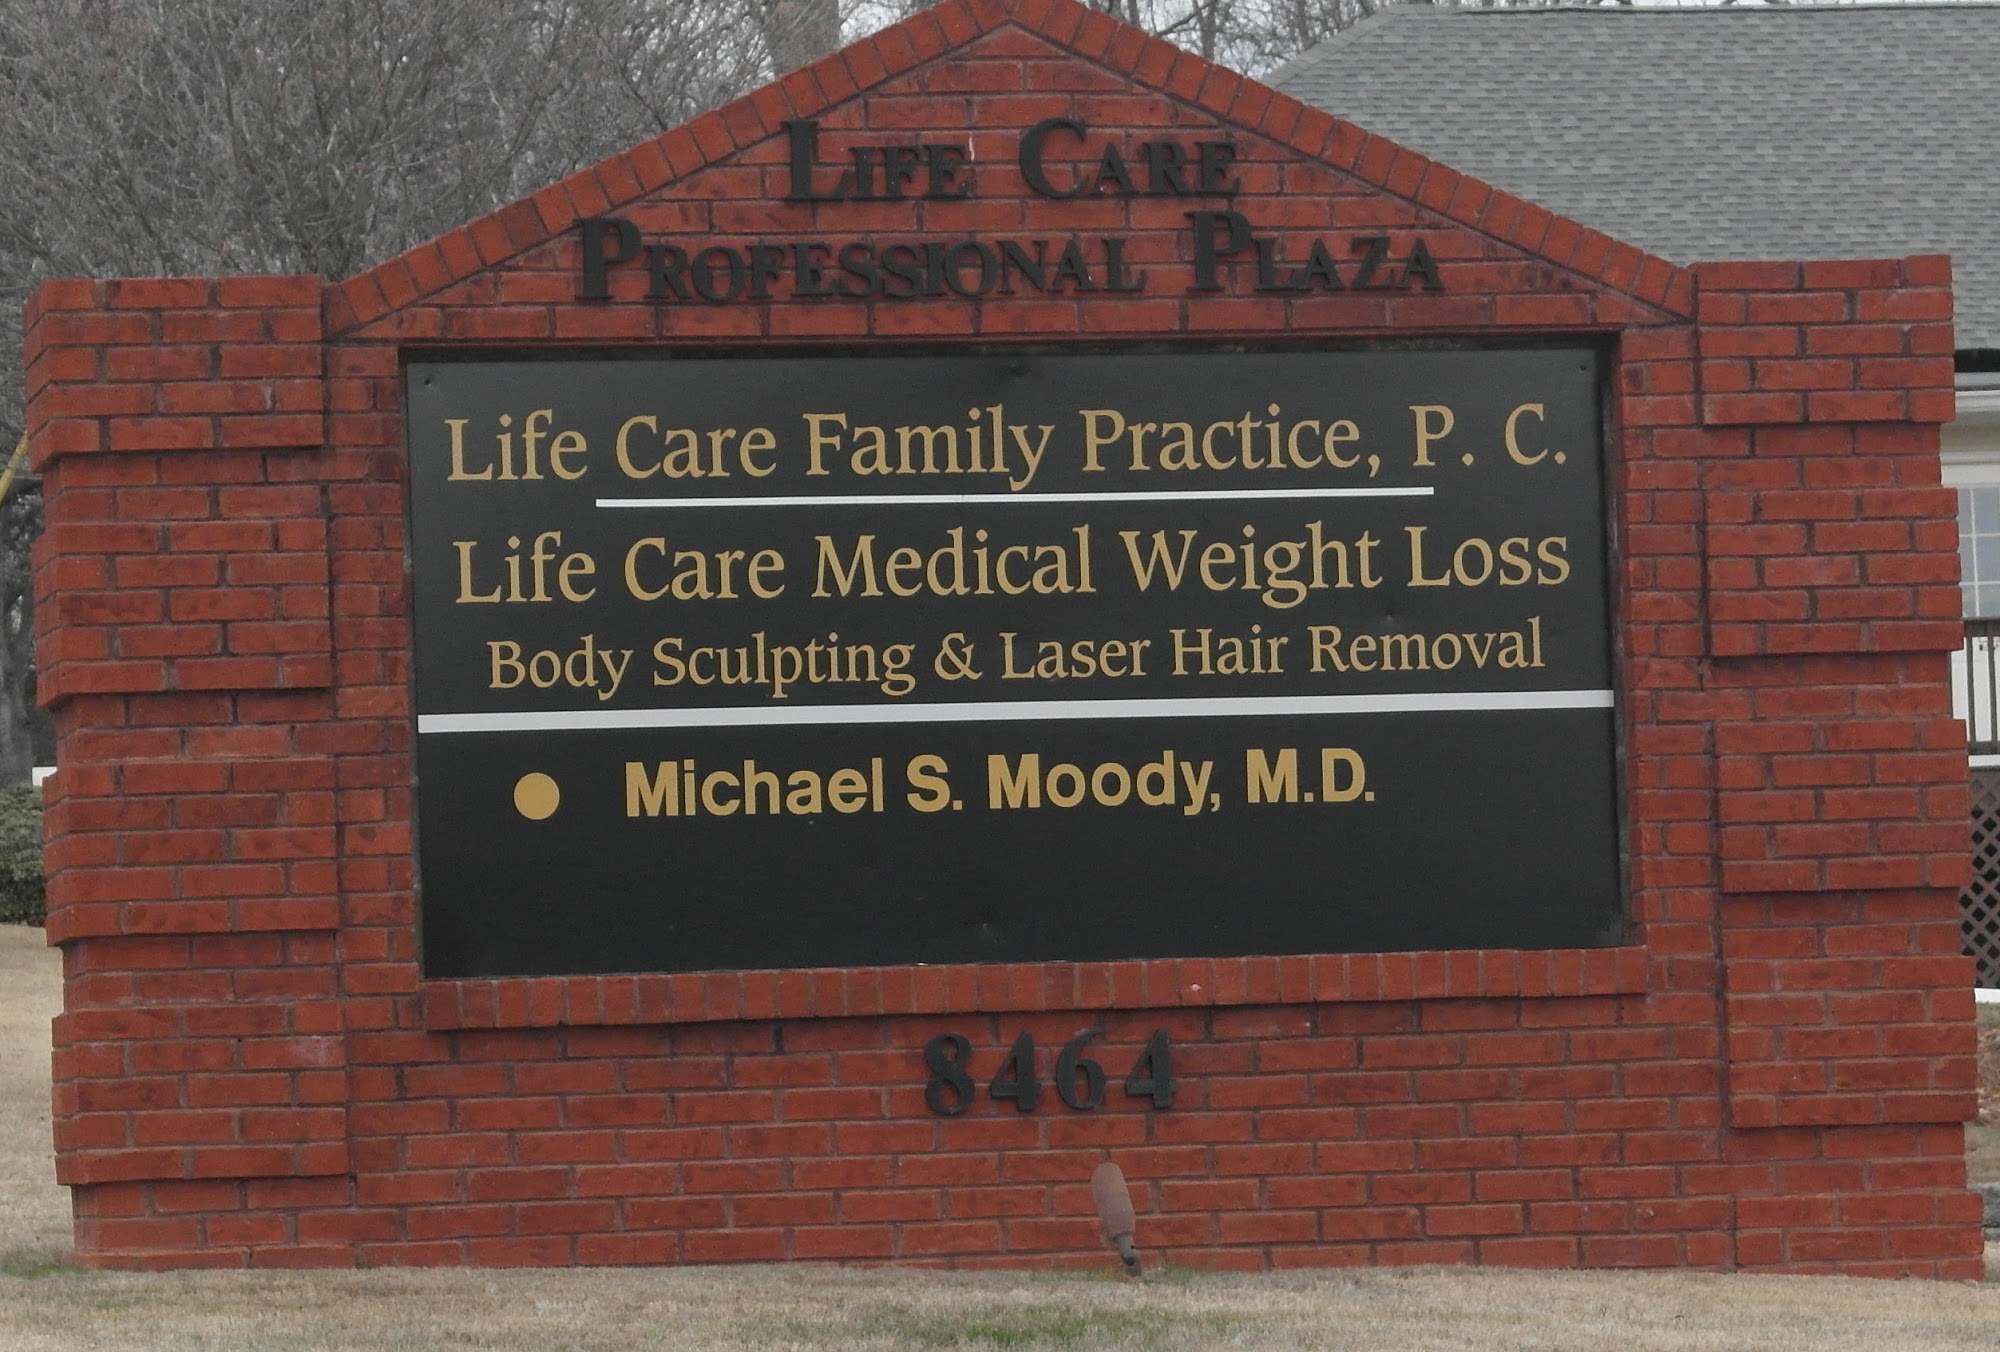 Life Care Family Practice & Medical Weight Loss